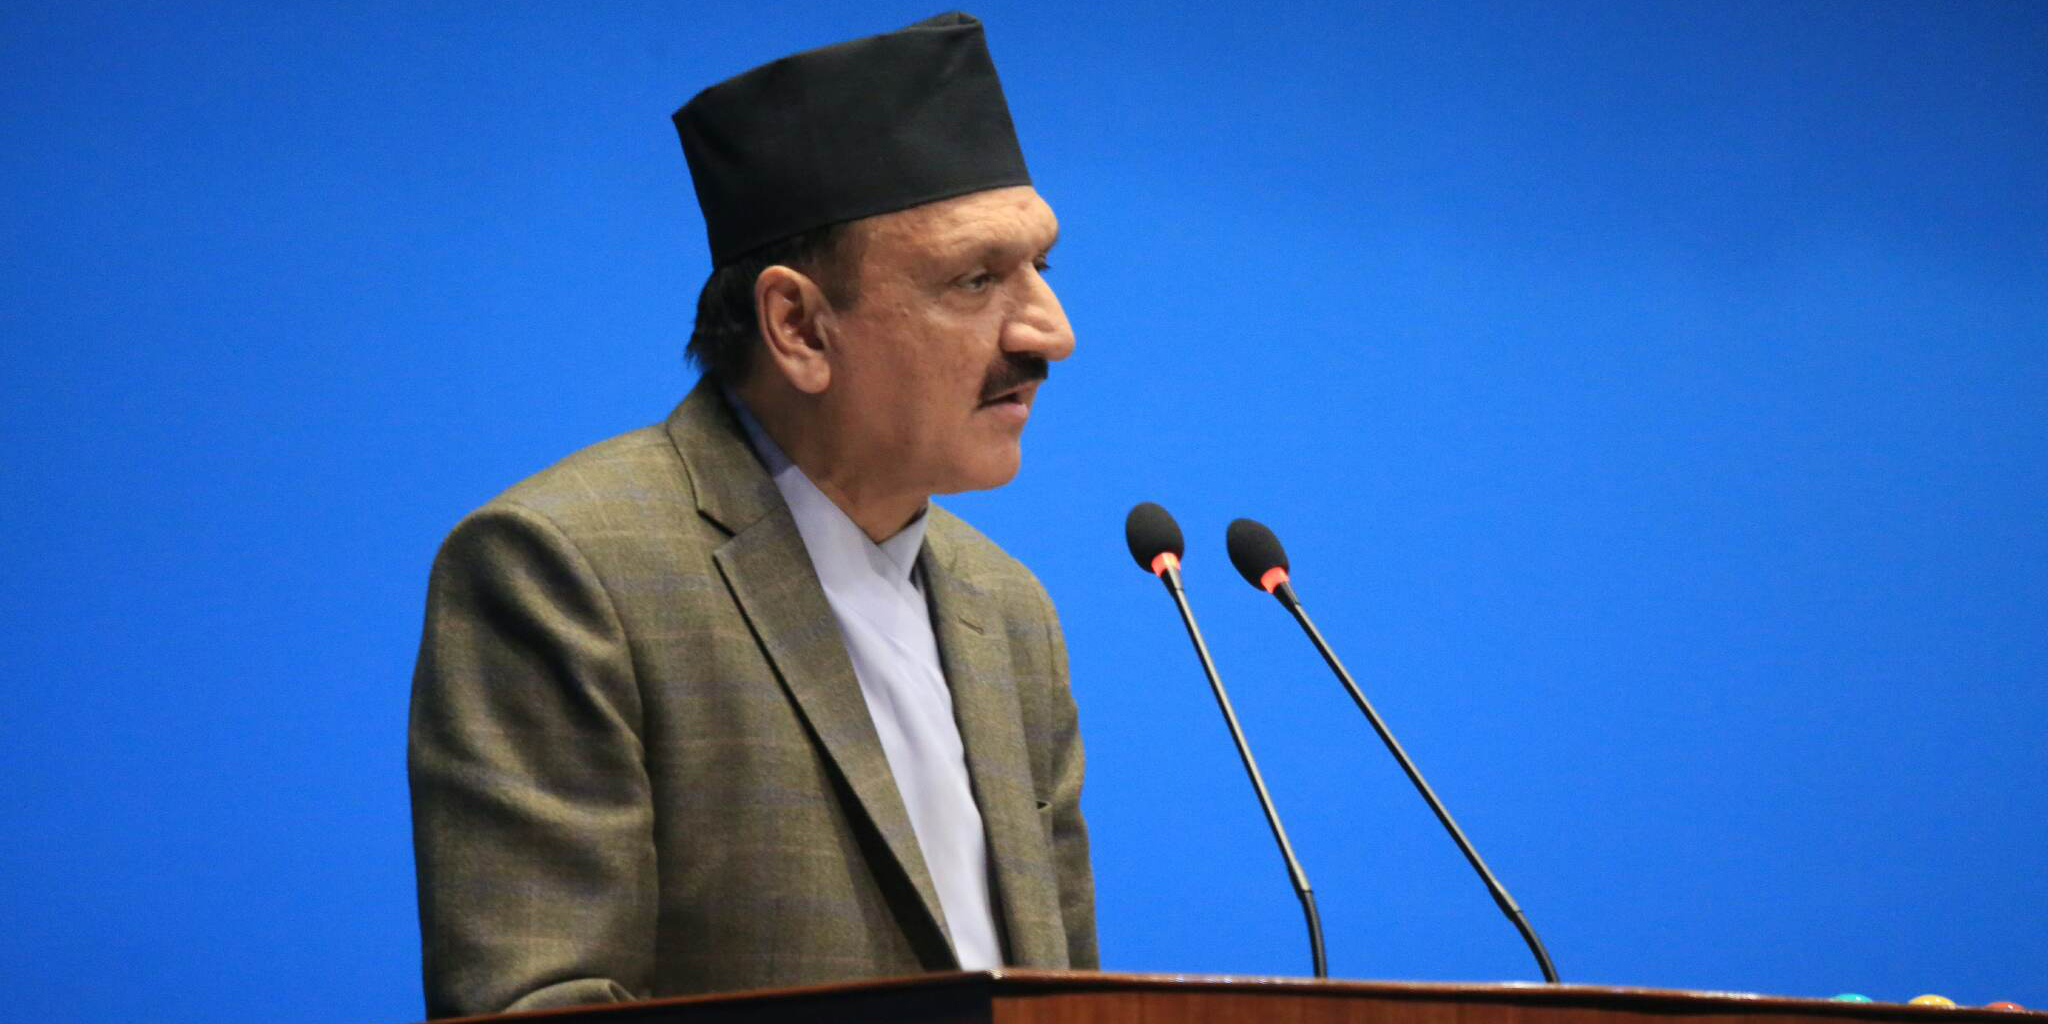 Resource mobilization for budget challenging: Mahat